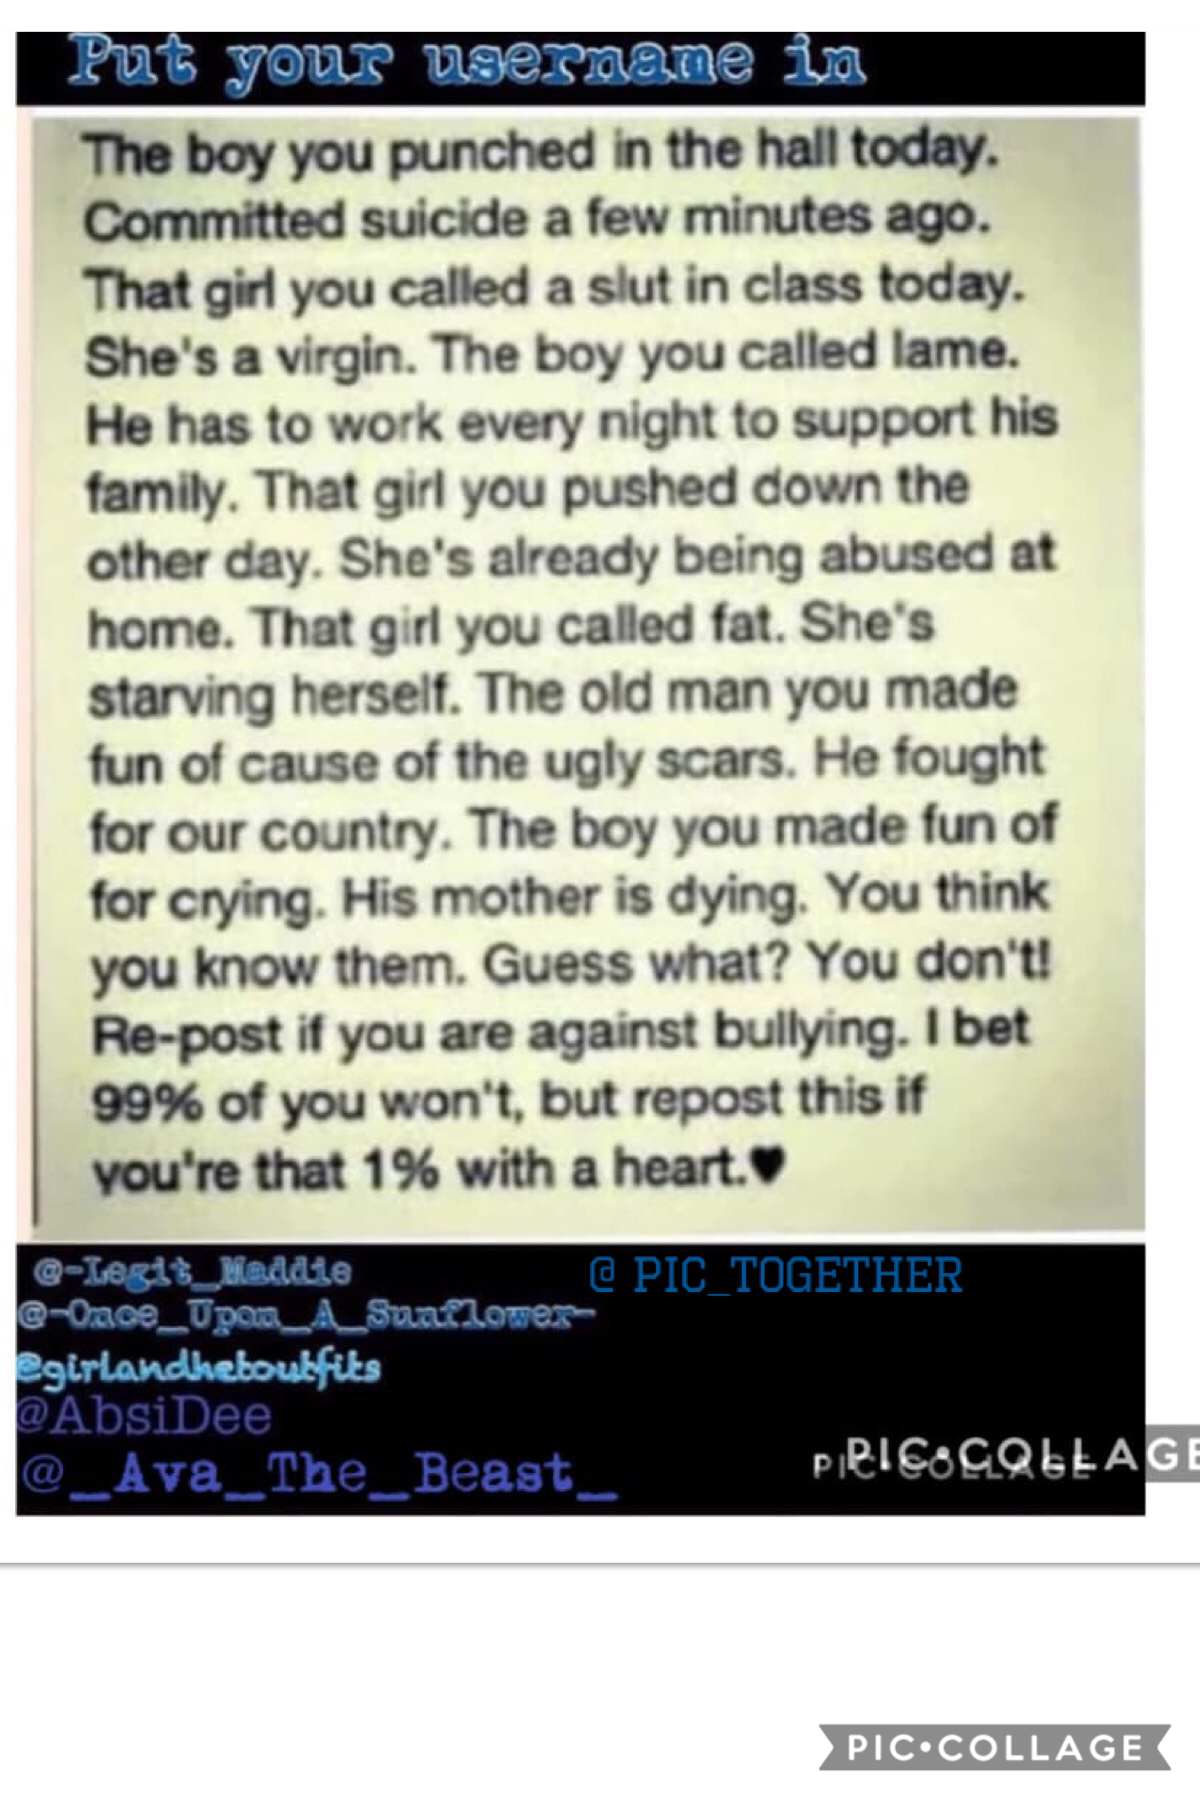 Stop bulling be the nice person. Repost. God bless. 